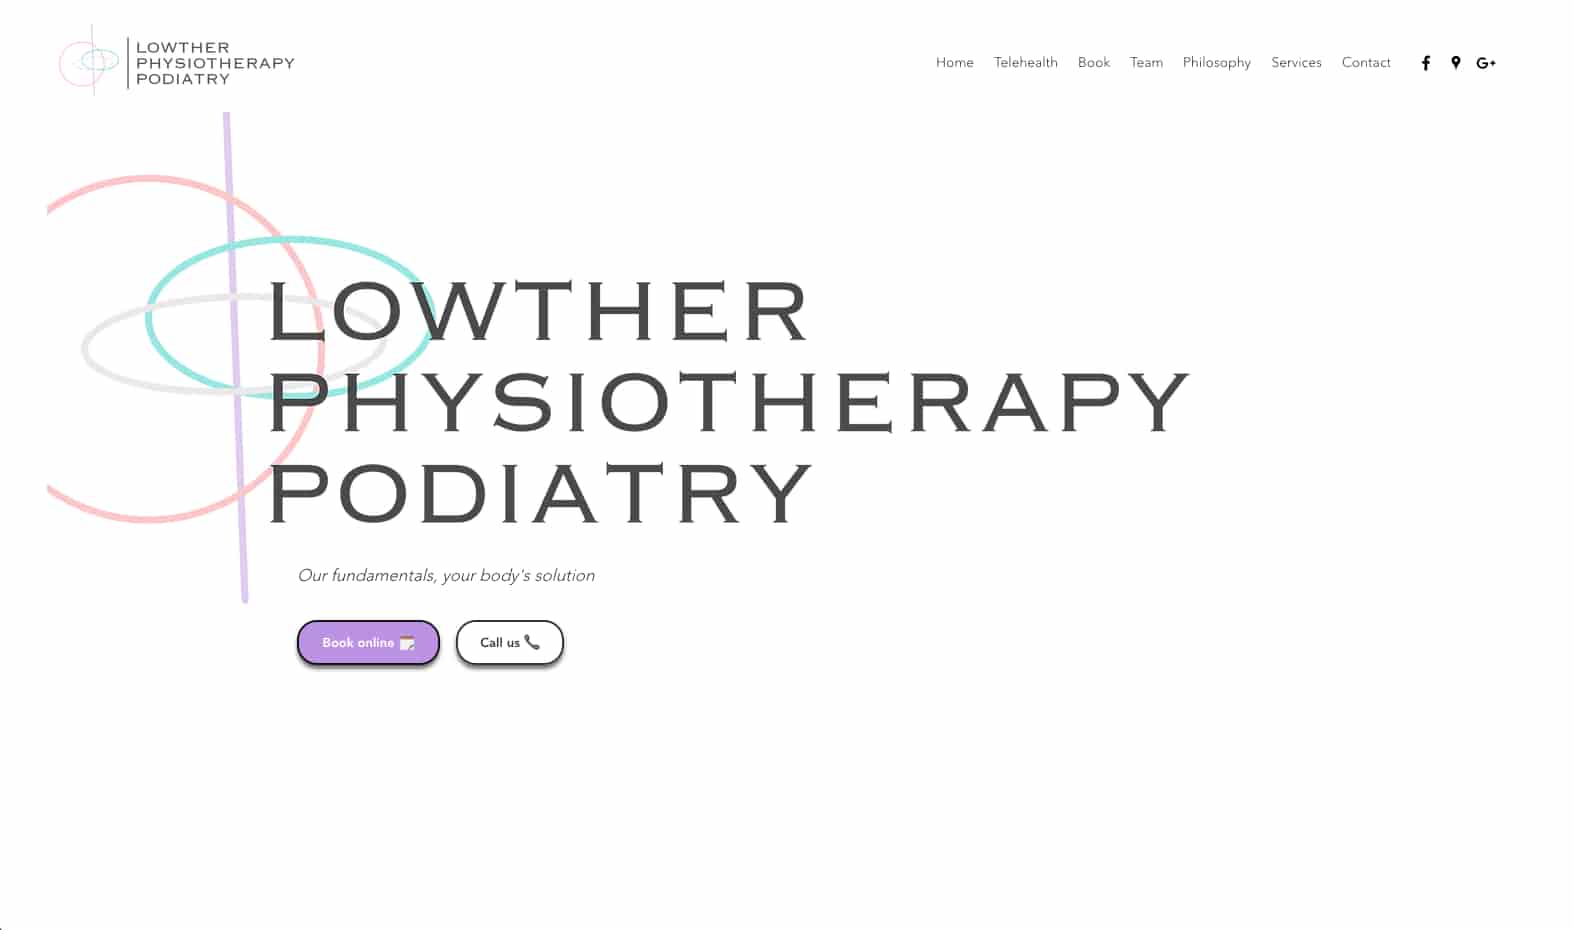 Lowther Physiotherapy & Podiatry